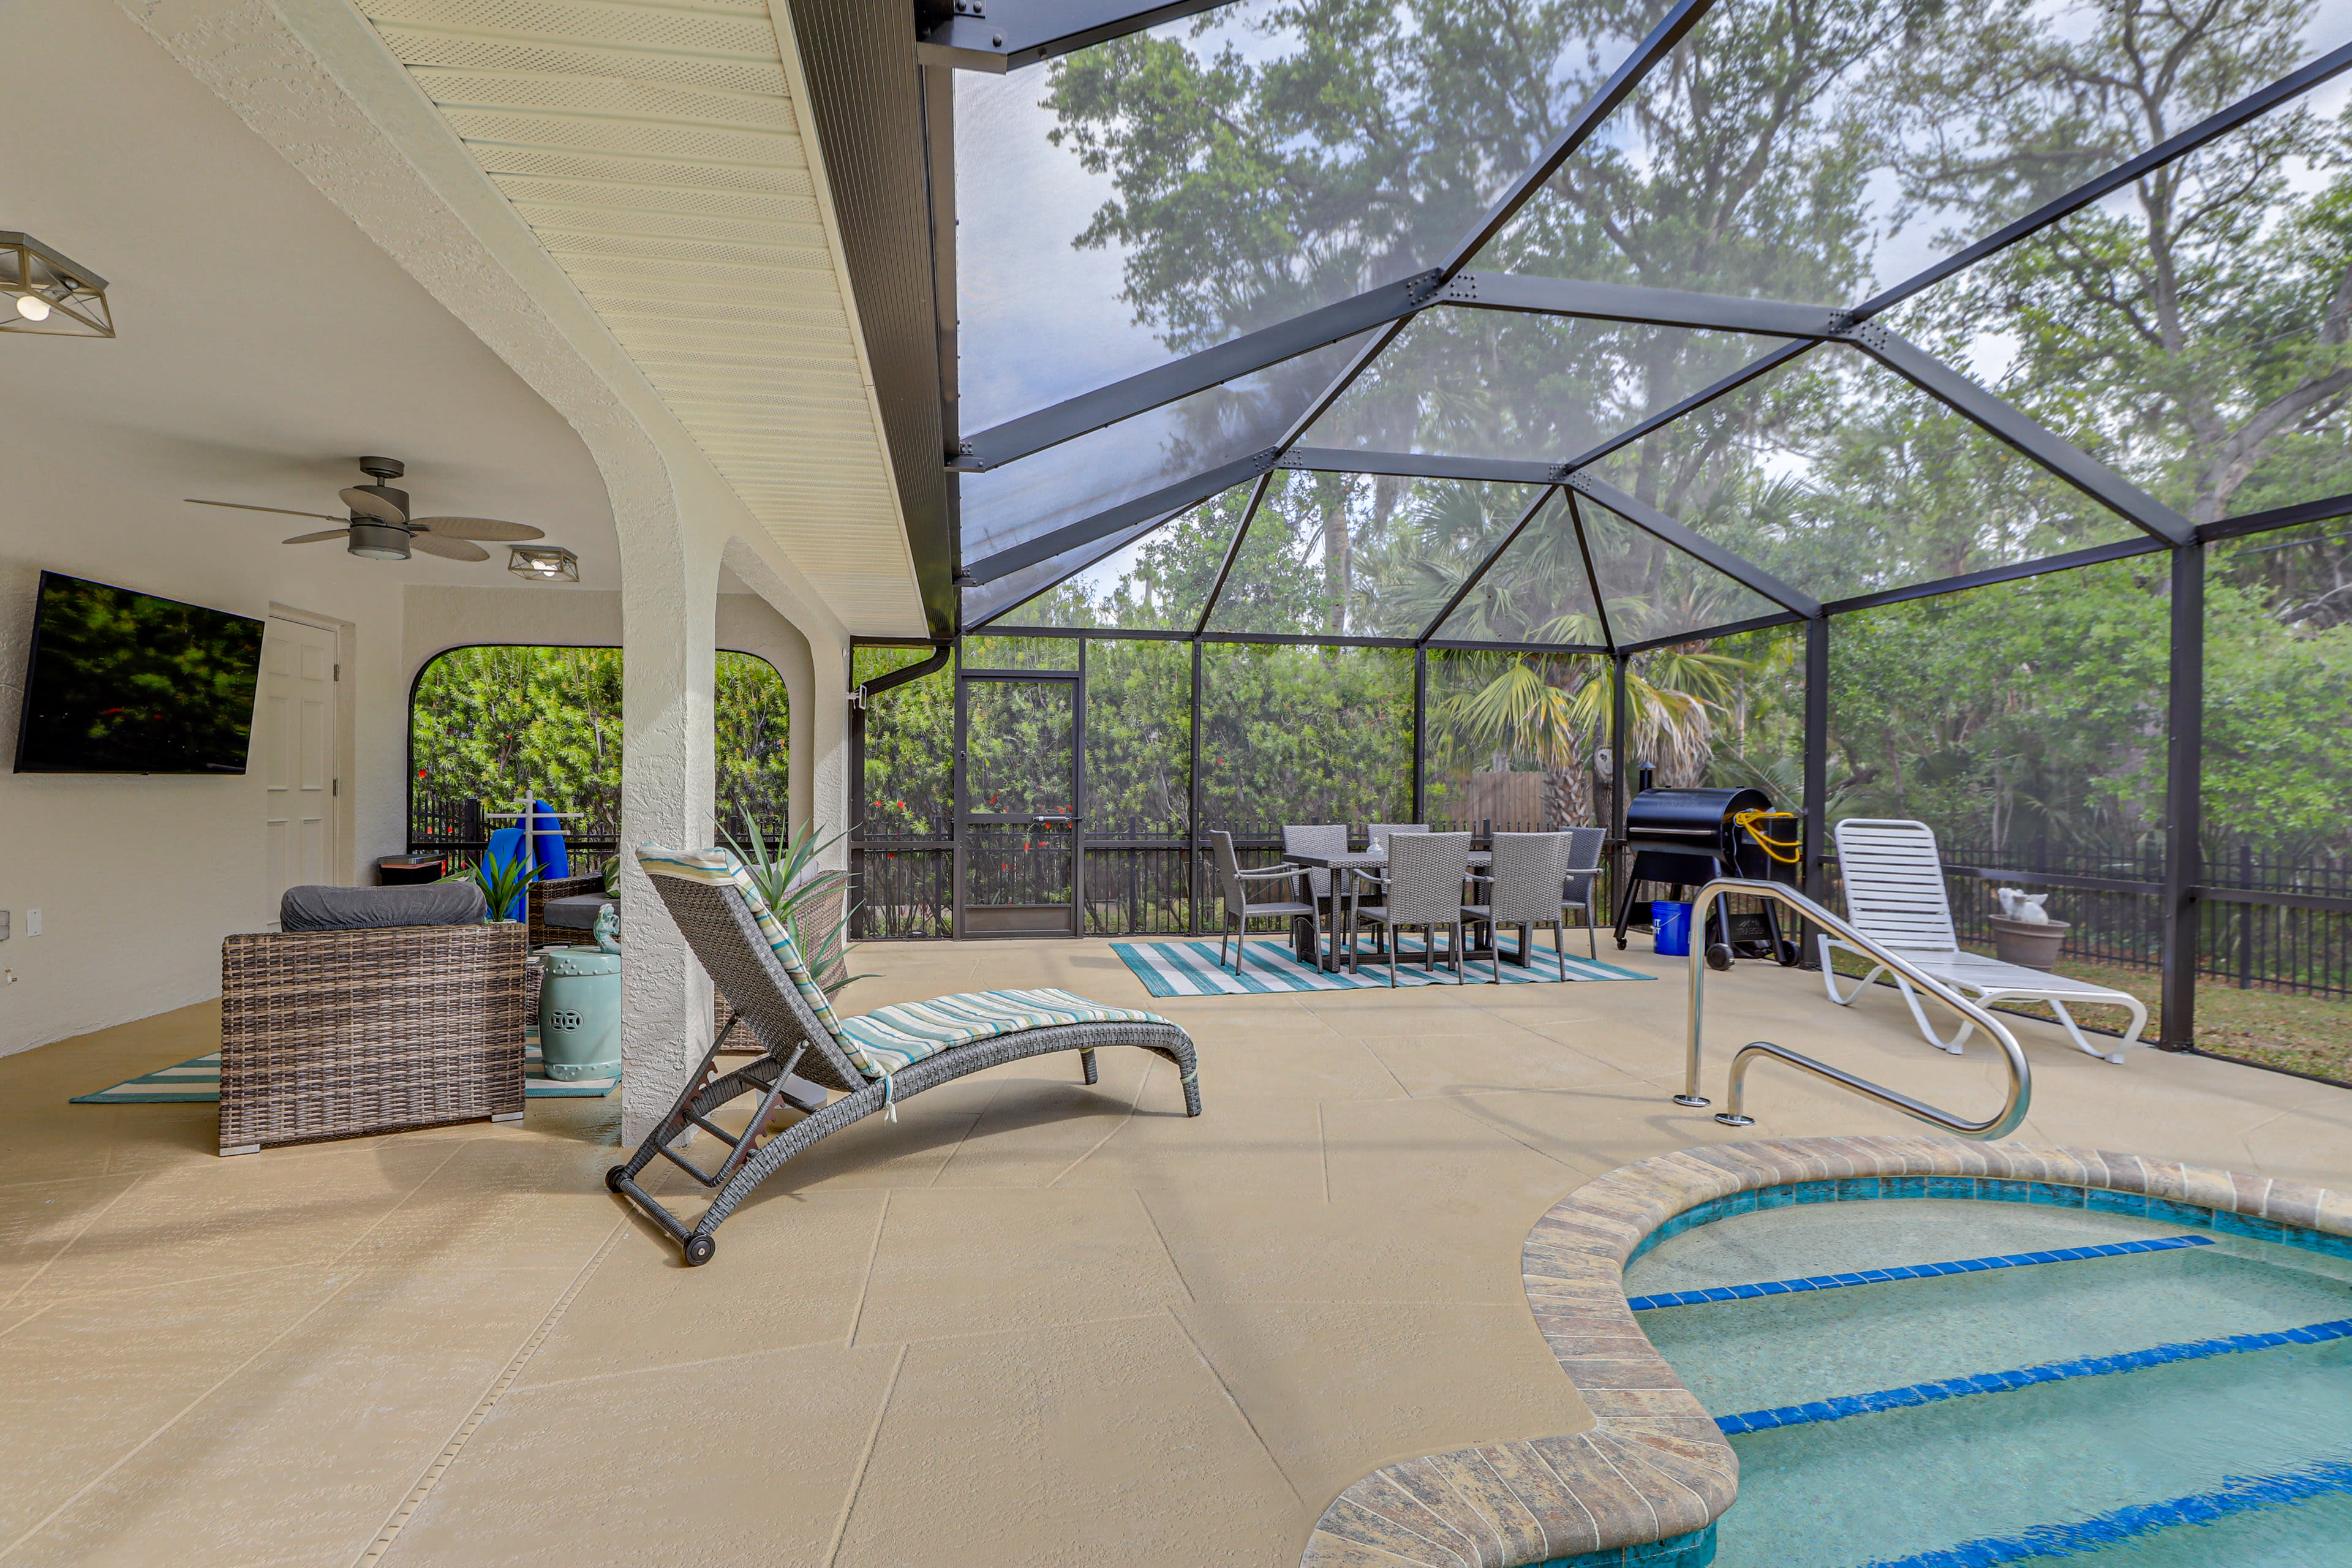 Lanai | Outdoor Dining | Traeger Smoker/Grill | Heated Saltwater Pool